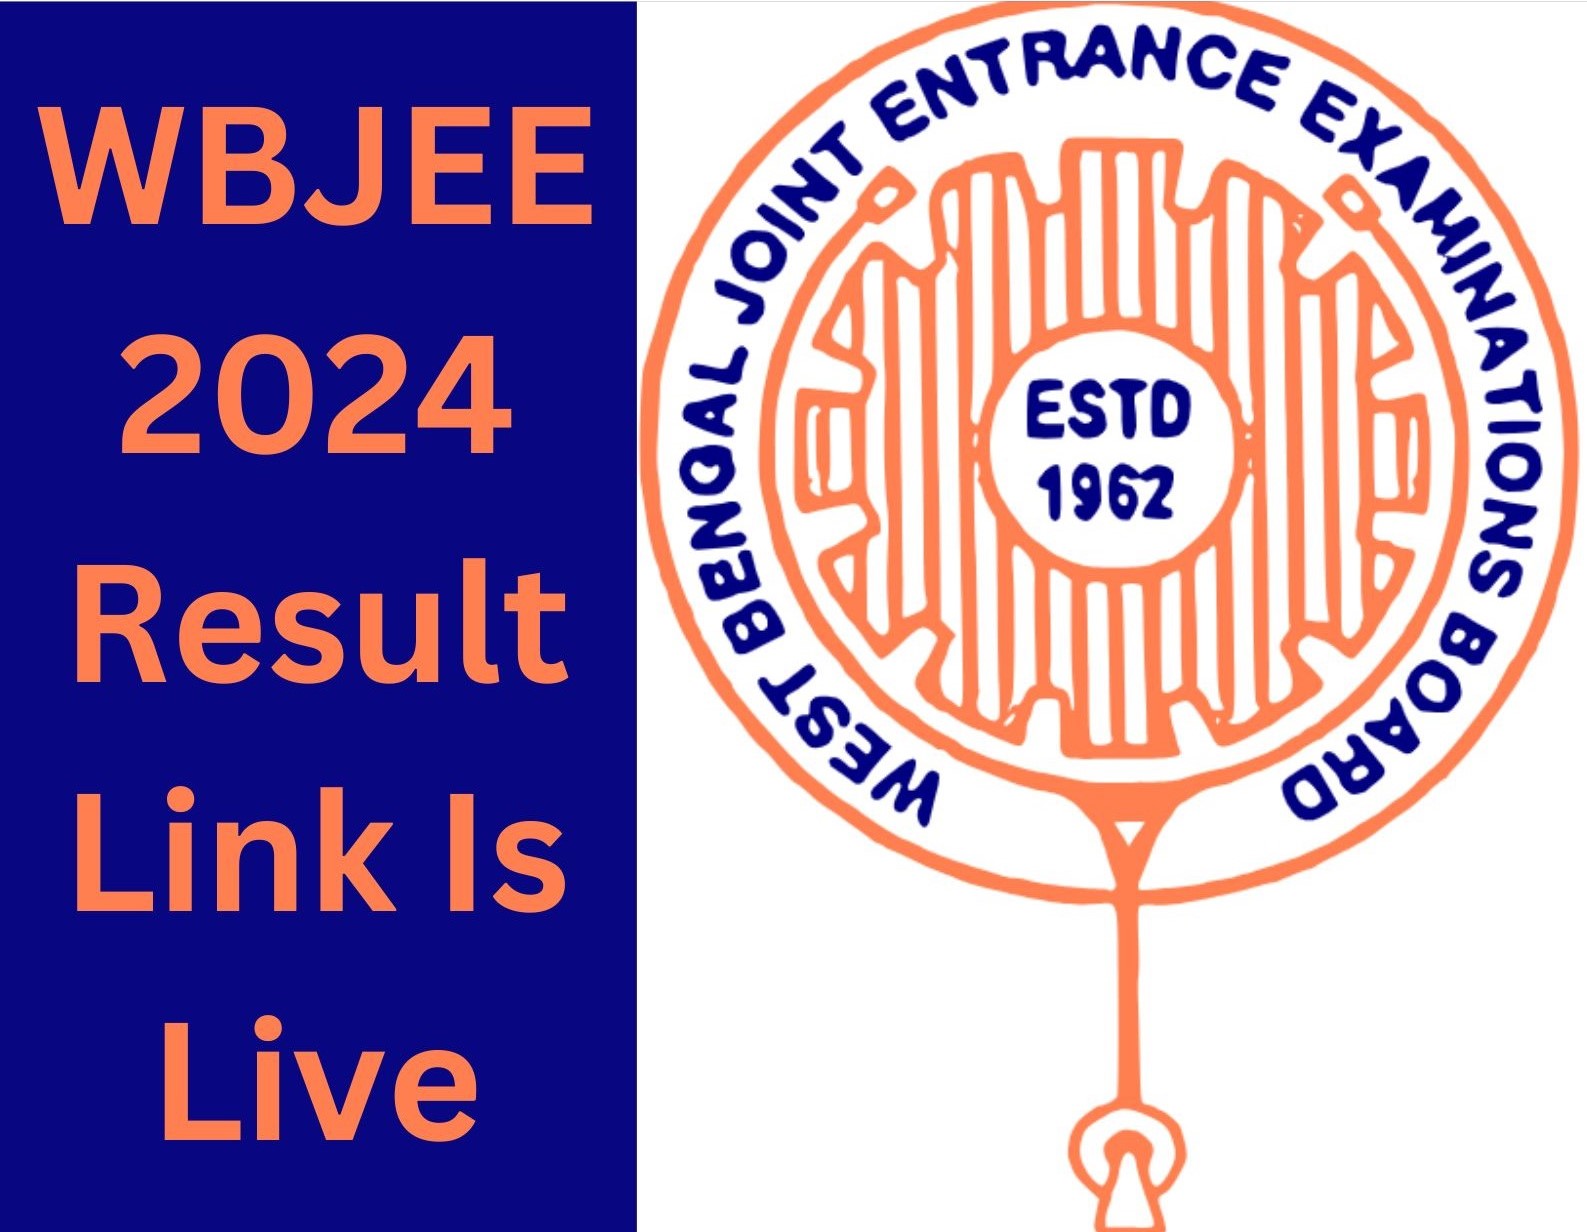 Check WBJEE 2024 Result Link Live @wbjeeb.nic.in